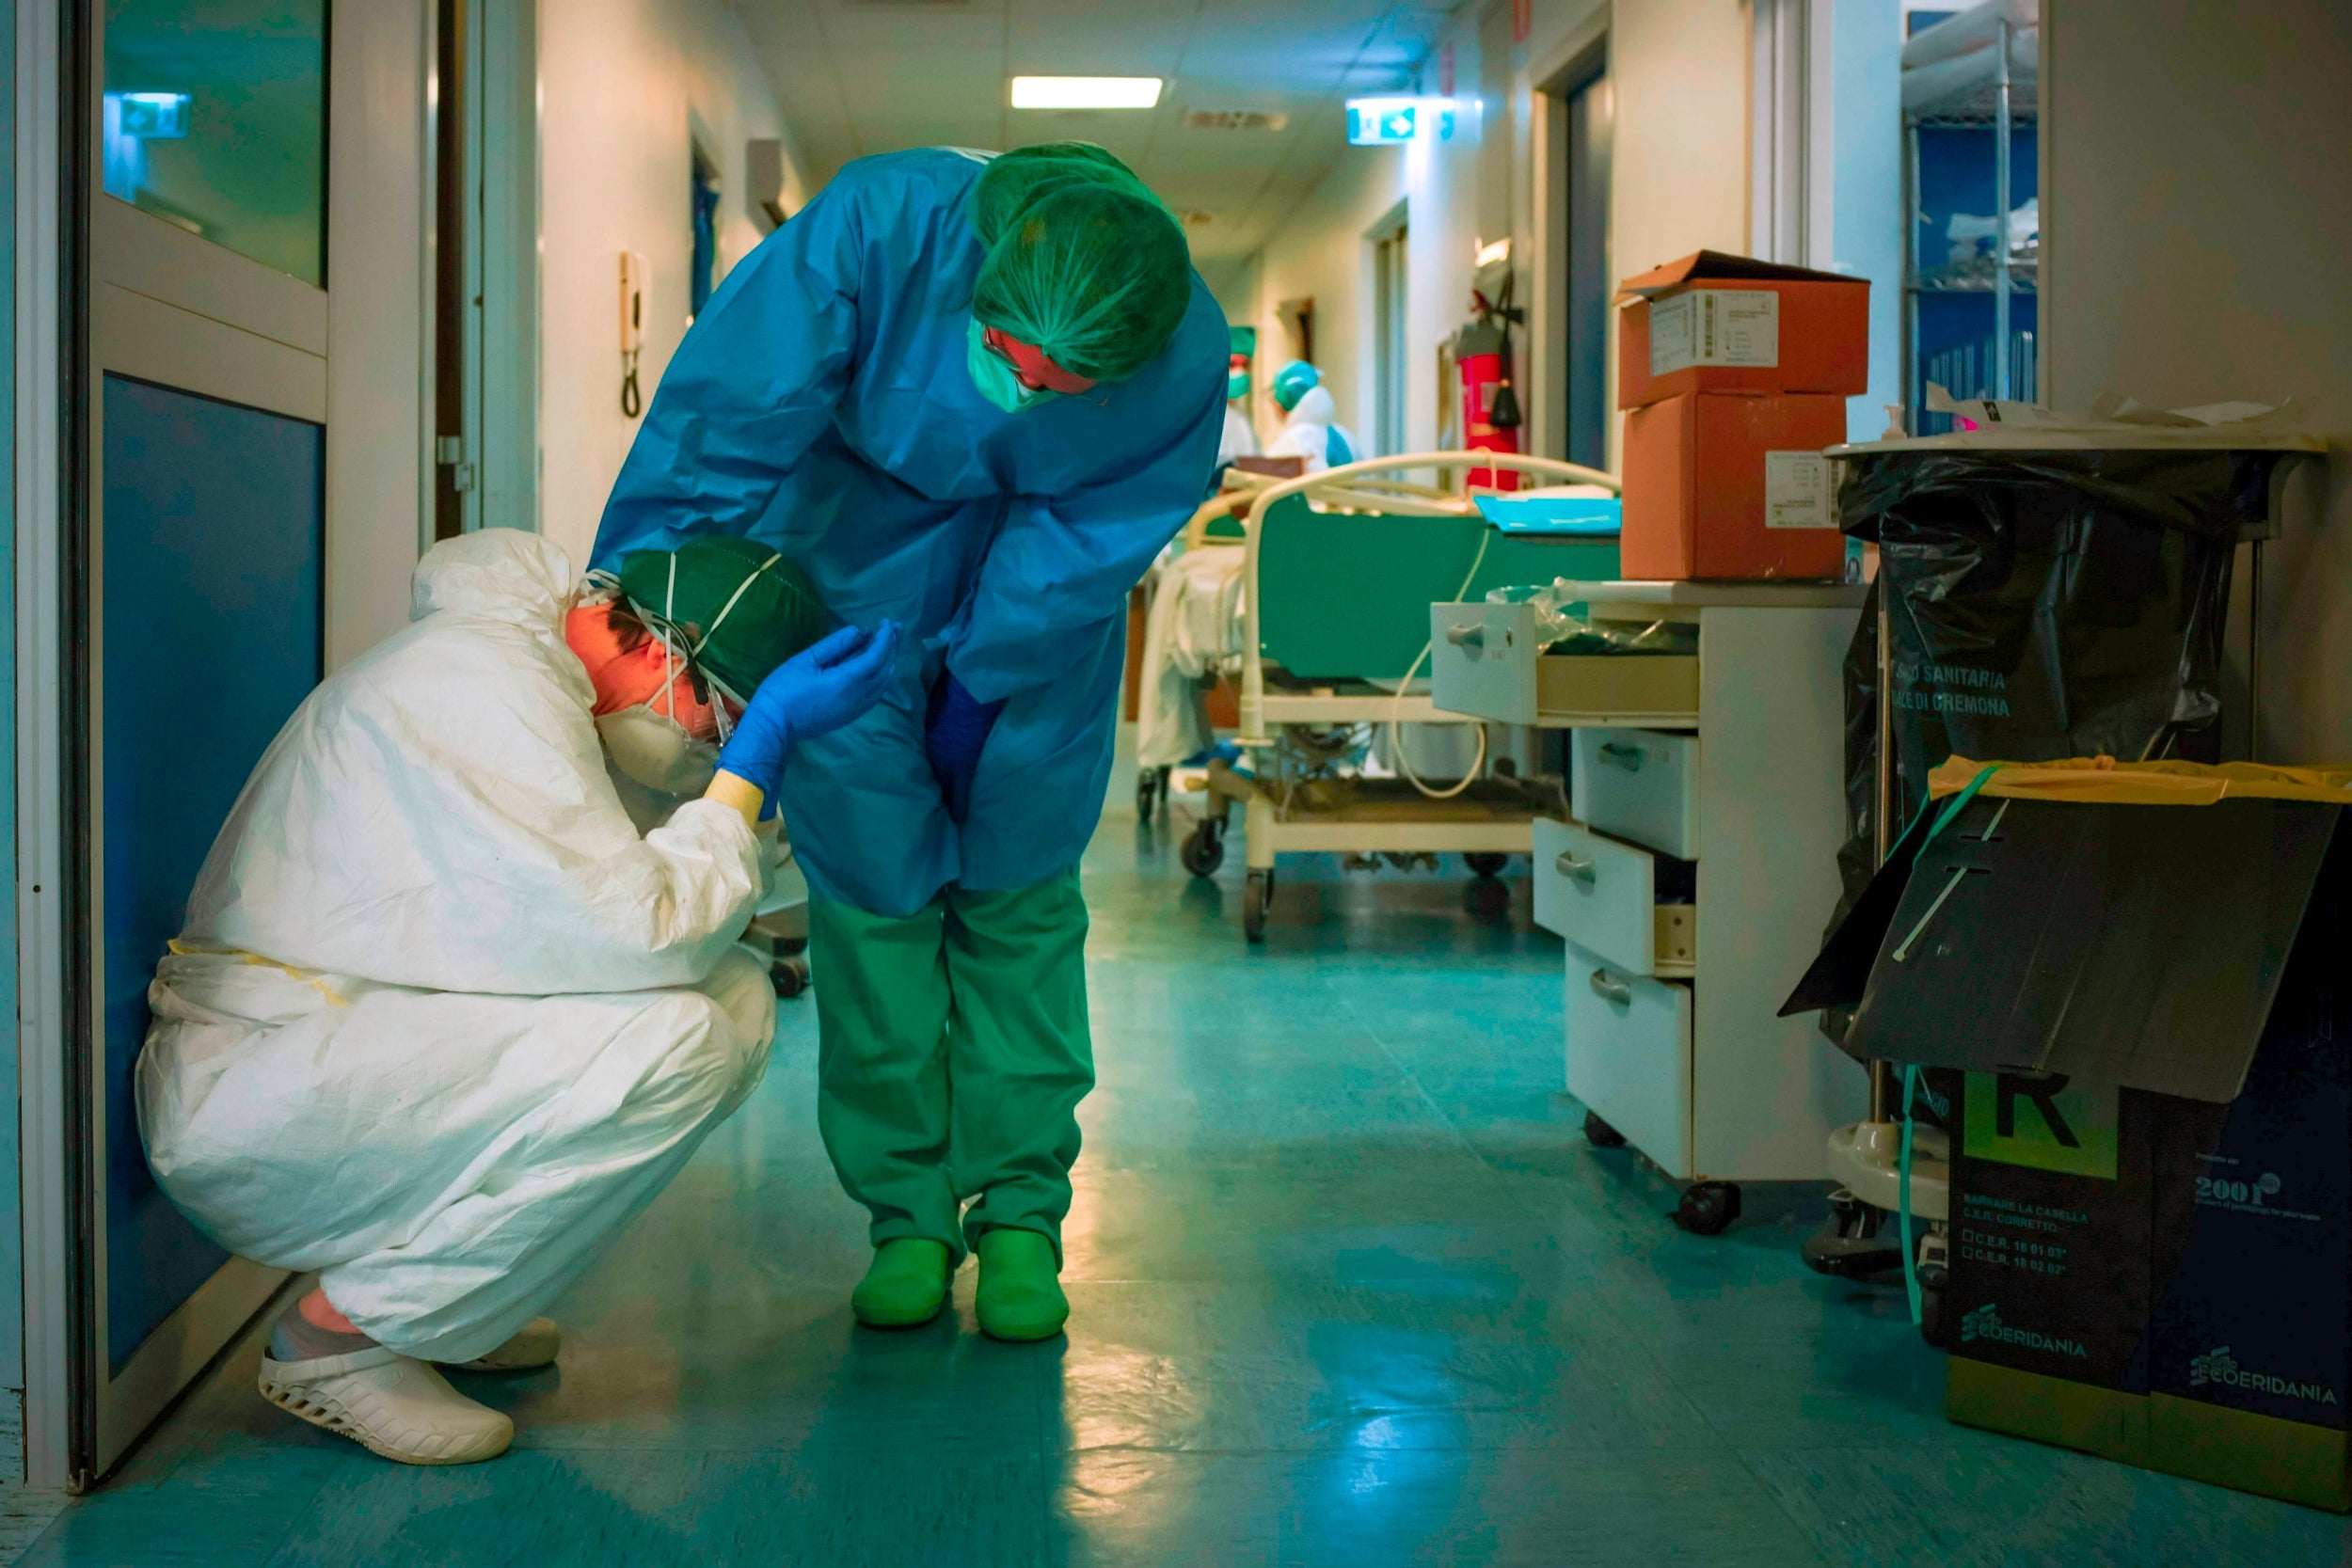 A nurse comforts another as they change shifts at Cremona hospital, south of Milan